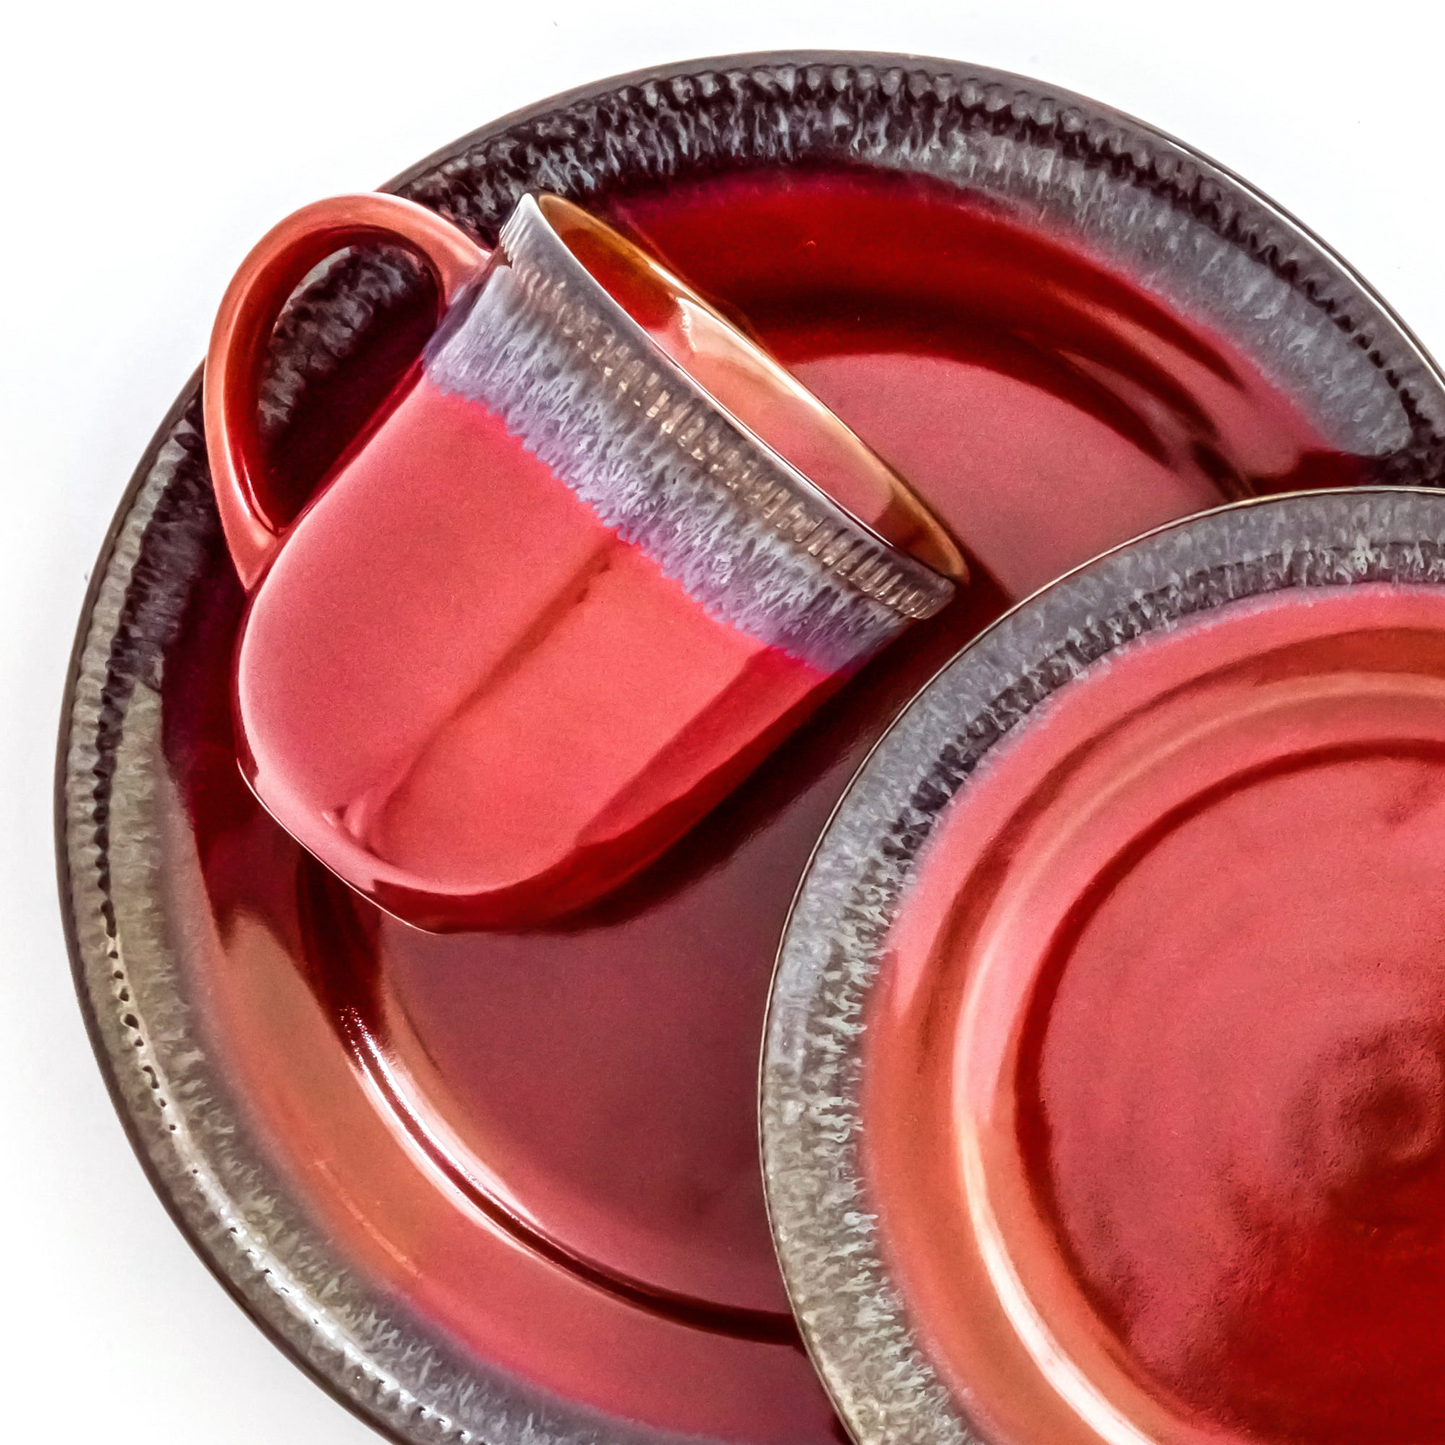 Better Homes & Gardens Painted Canyon 16 Pieces Dinnerware Set, Red